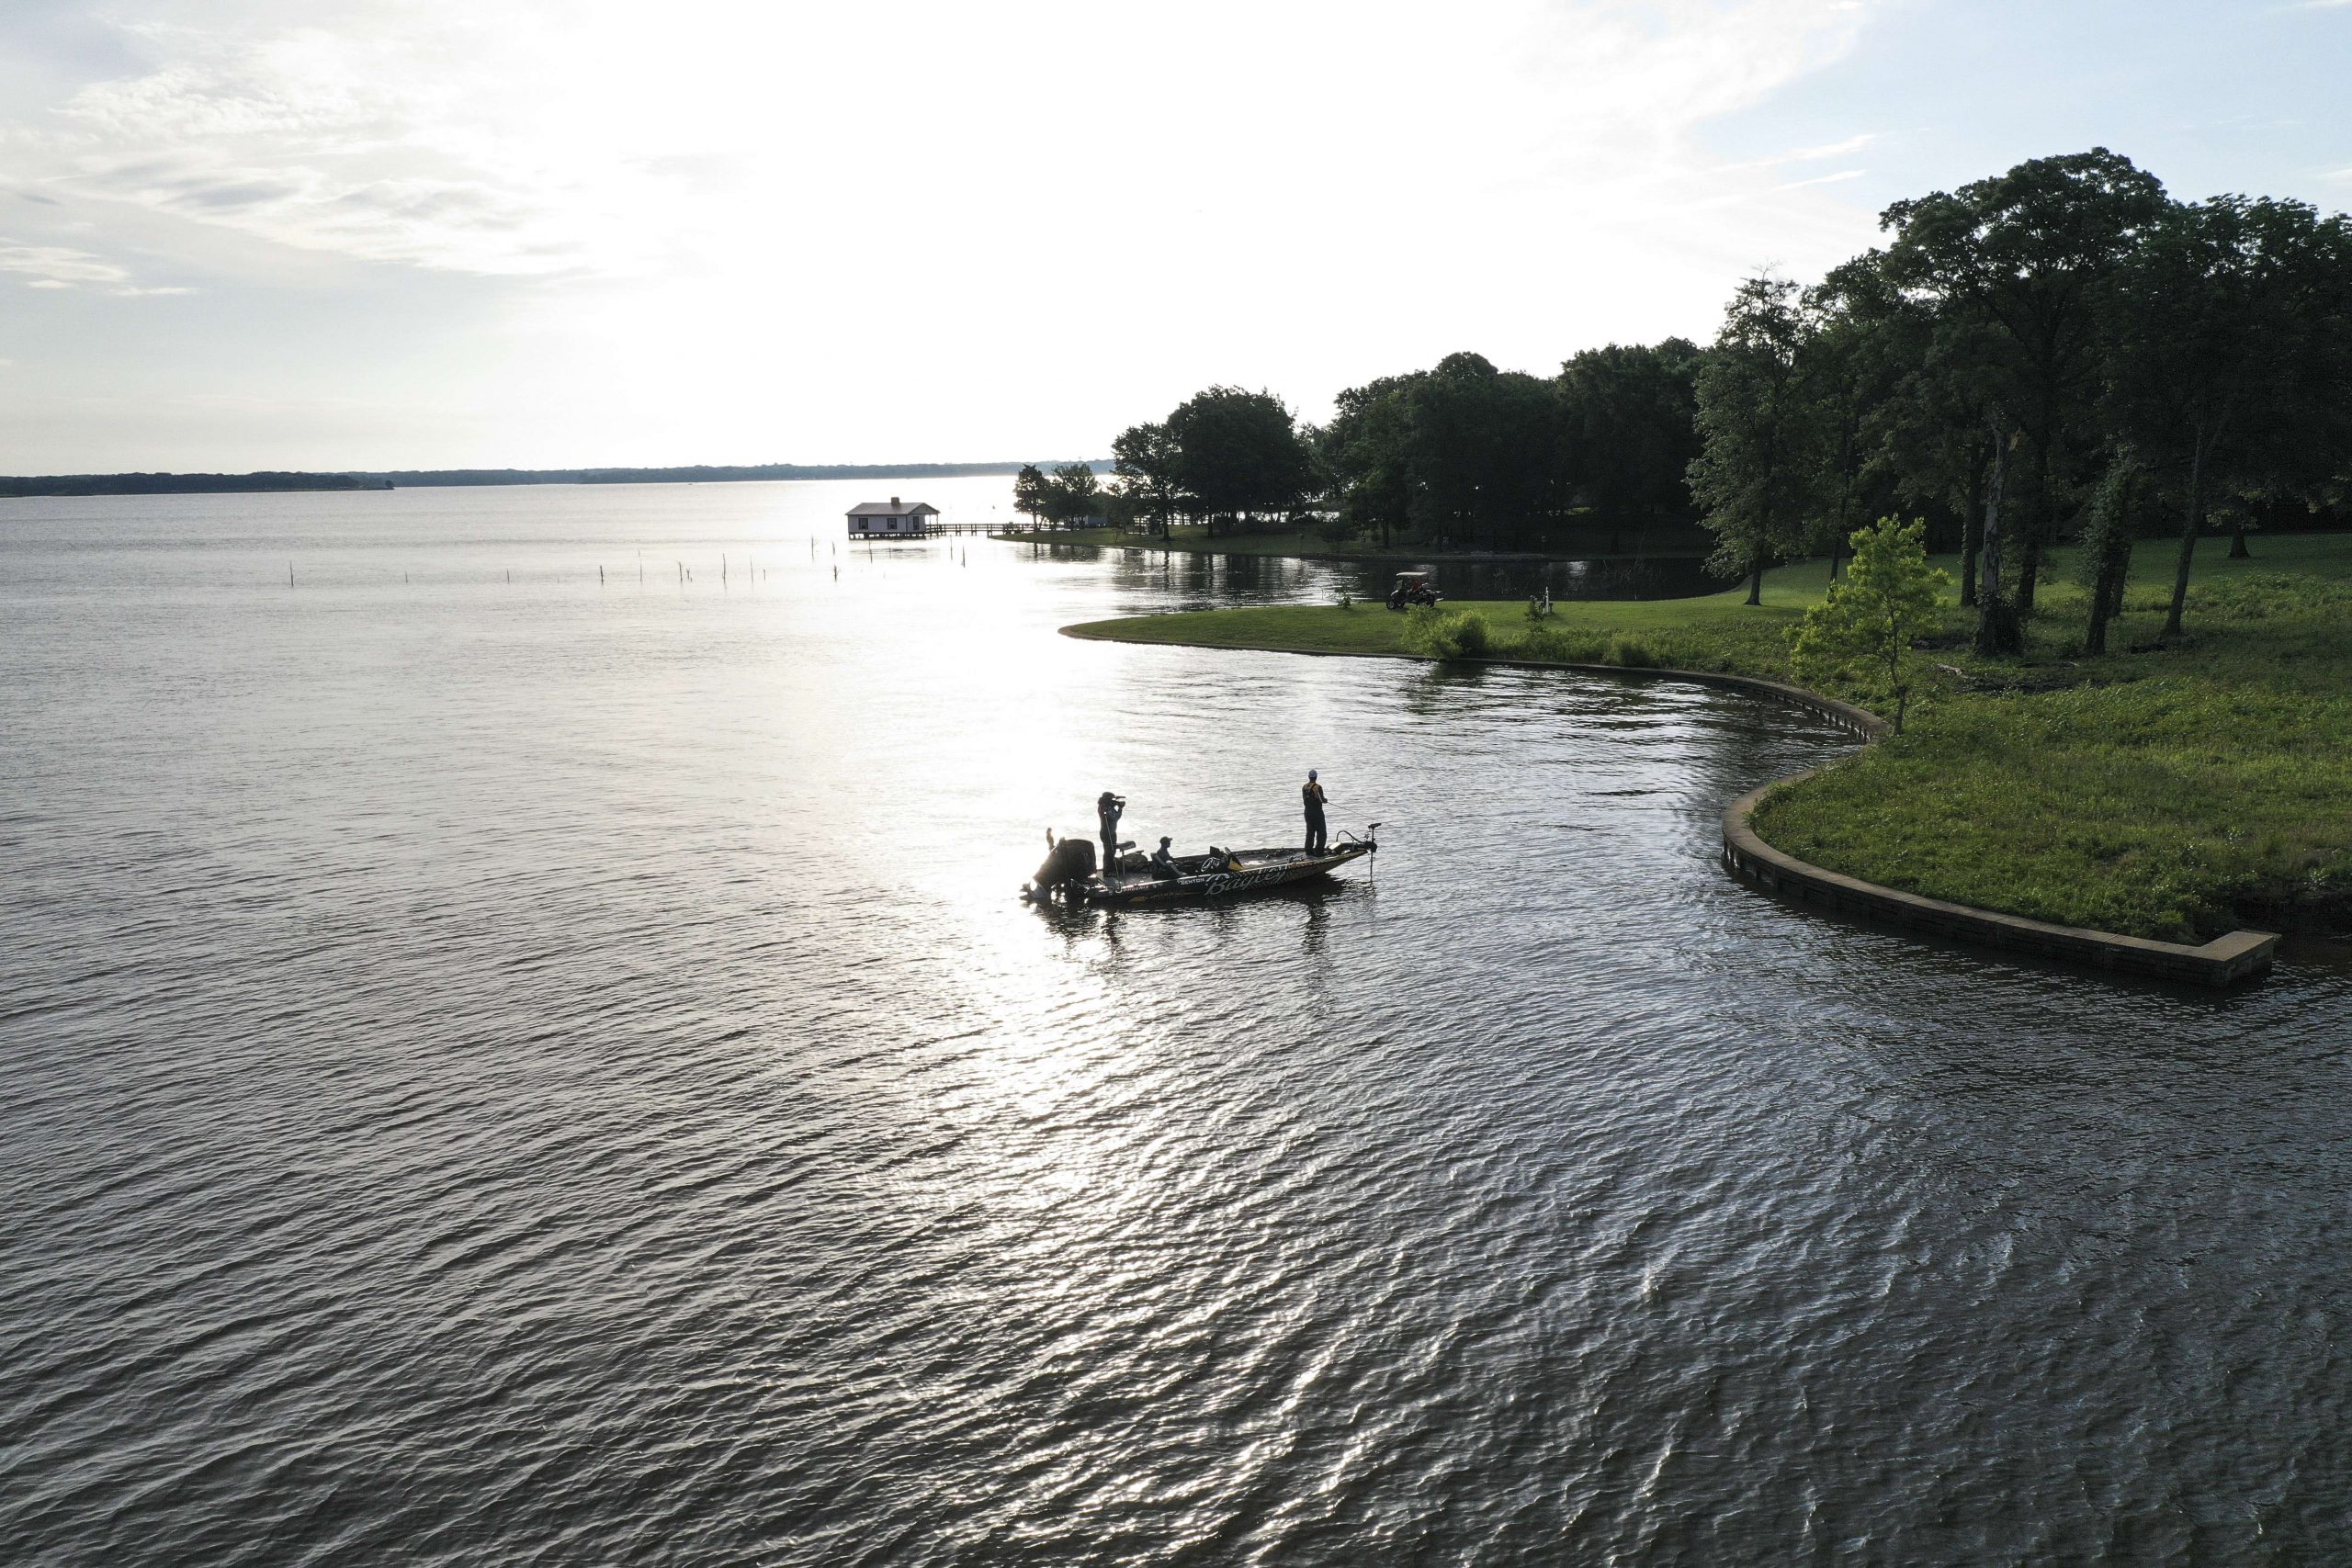 <h4>1. Lake Fork, Texas</h4>[27,690 acres]<BR> What more can be said about this slice of heaven some 65 miles east of Dallas? Those familiar with Fork know it sets the table for some of the biggest catches in the U.S. each year, but look what the Elites did in the April 2021 stop on this hallowed spot. Lee Livesay (112-5 over four days) joined the Century Club and Patrick Walters (102-5) accomplished the feat on Fork for the second consecutive year. A whopping 20 ShareLunkers were caught on Fork in the first four months of 2021, with a 15.27-pound giant hooked in March. Hungry for hogs? Fork is your dream come true.